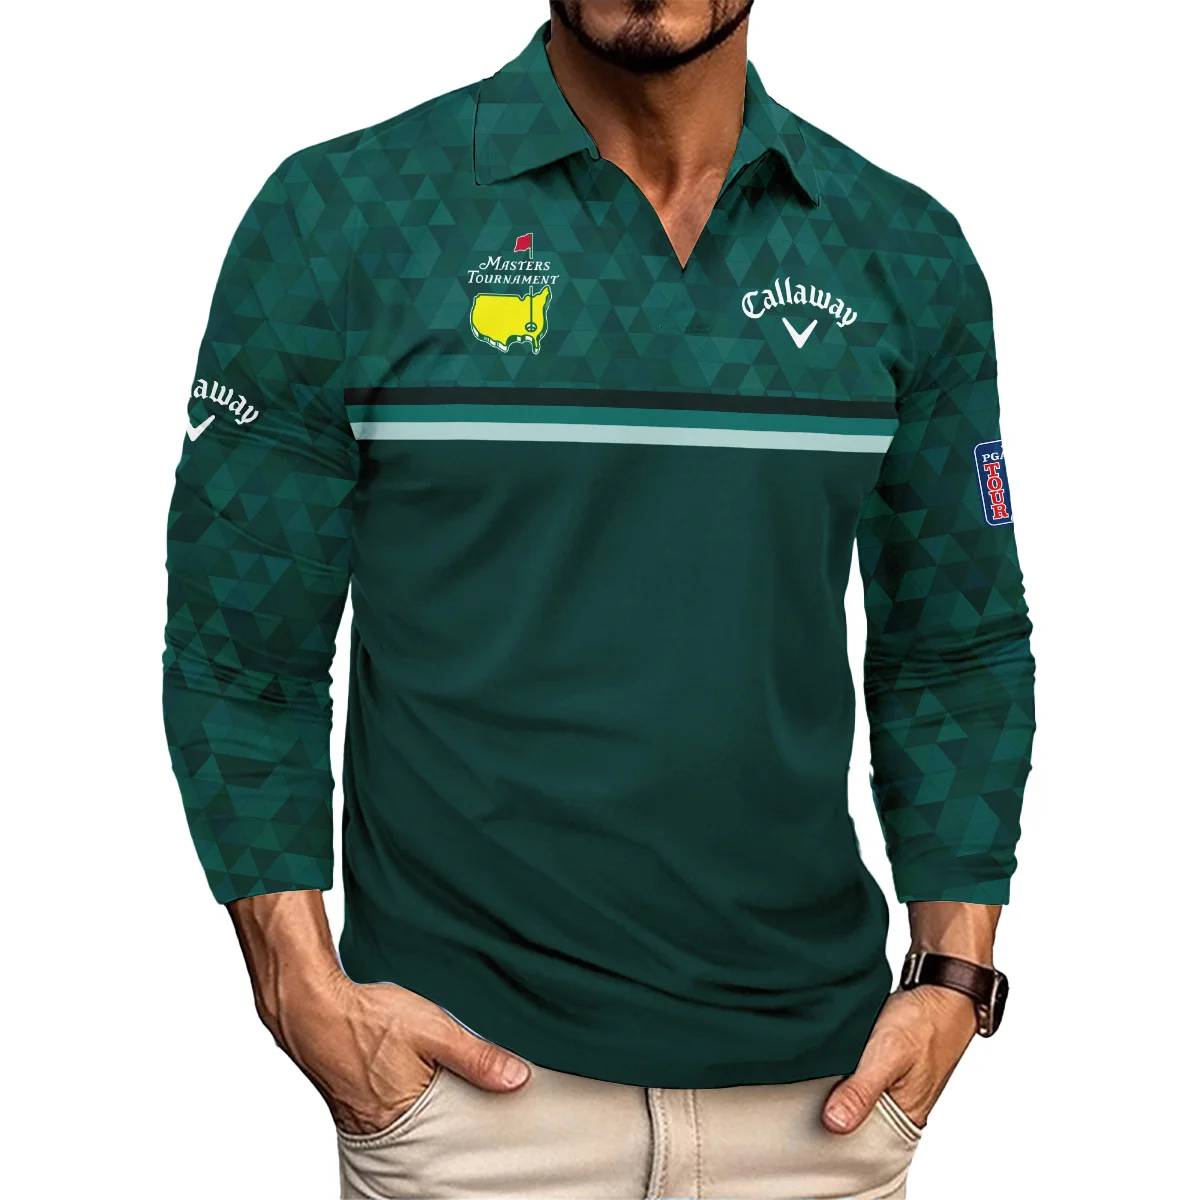 Dark Green Triangle Mosaic Pattern Masters Tournament Callaway Vneck Polo Shirt Style Classic Polo Shirt For Men